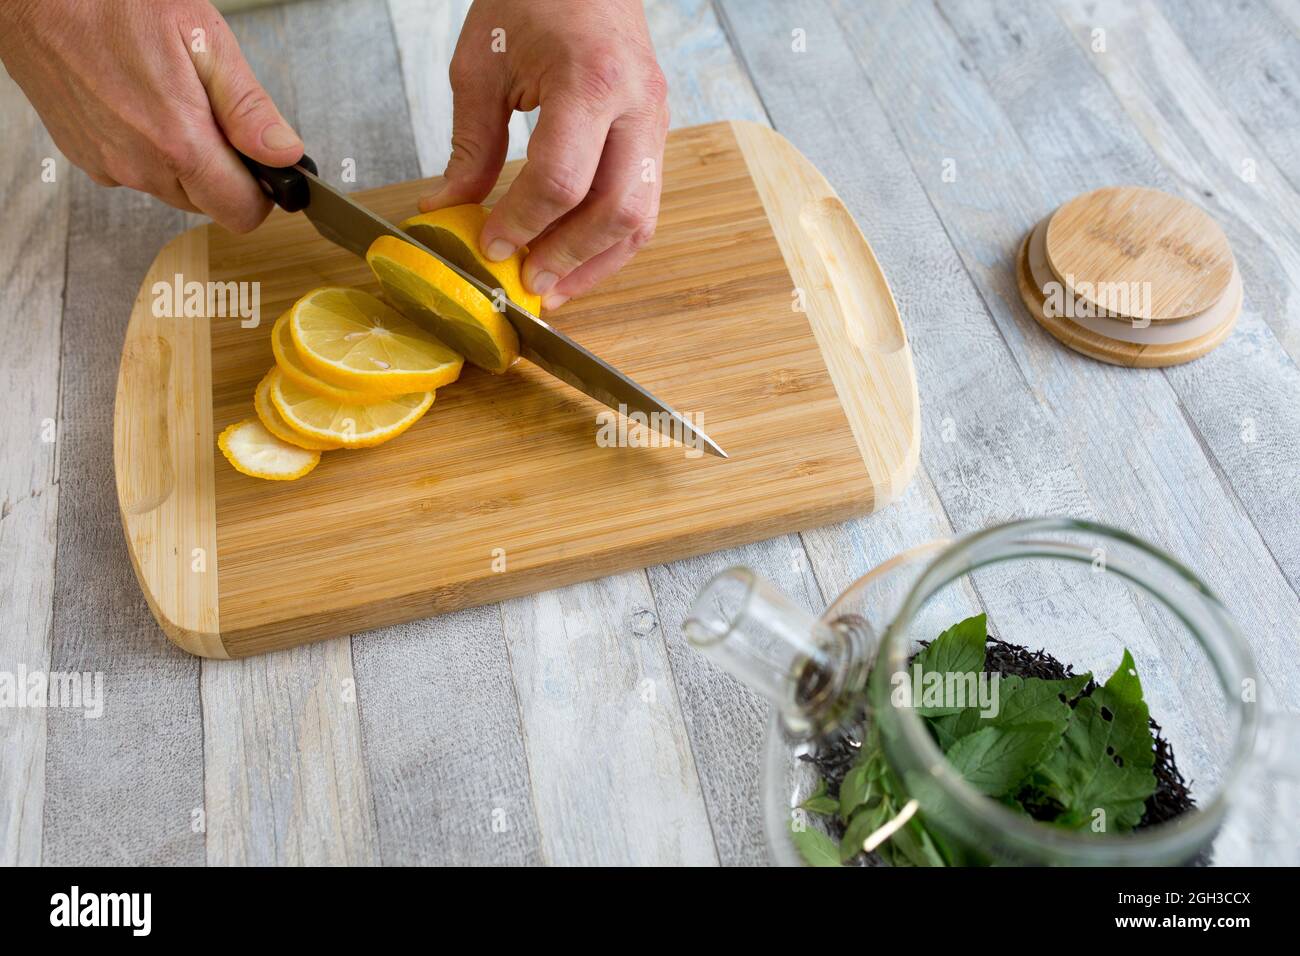 https://c8.alamy.com/comp/2GH3CCX/a-woman-cuts-a-lemon-on-a-wooden-kitchen-board-with-a-sharp-large-knife-healthy-food-concept-the-process-of-making-tea-with-mint-and-lemon-2GH3CCX.jpg